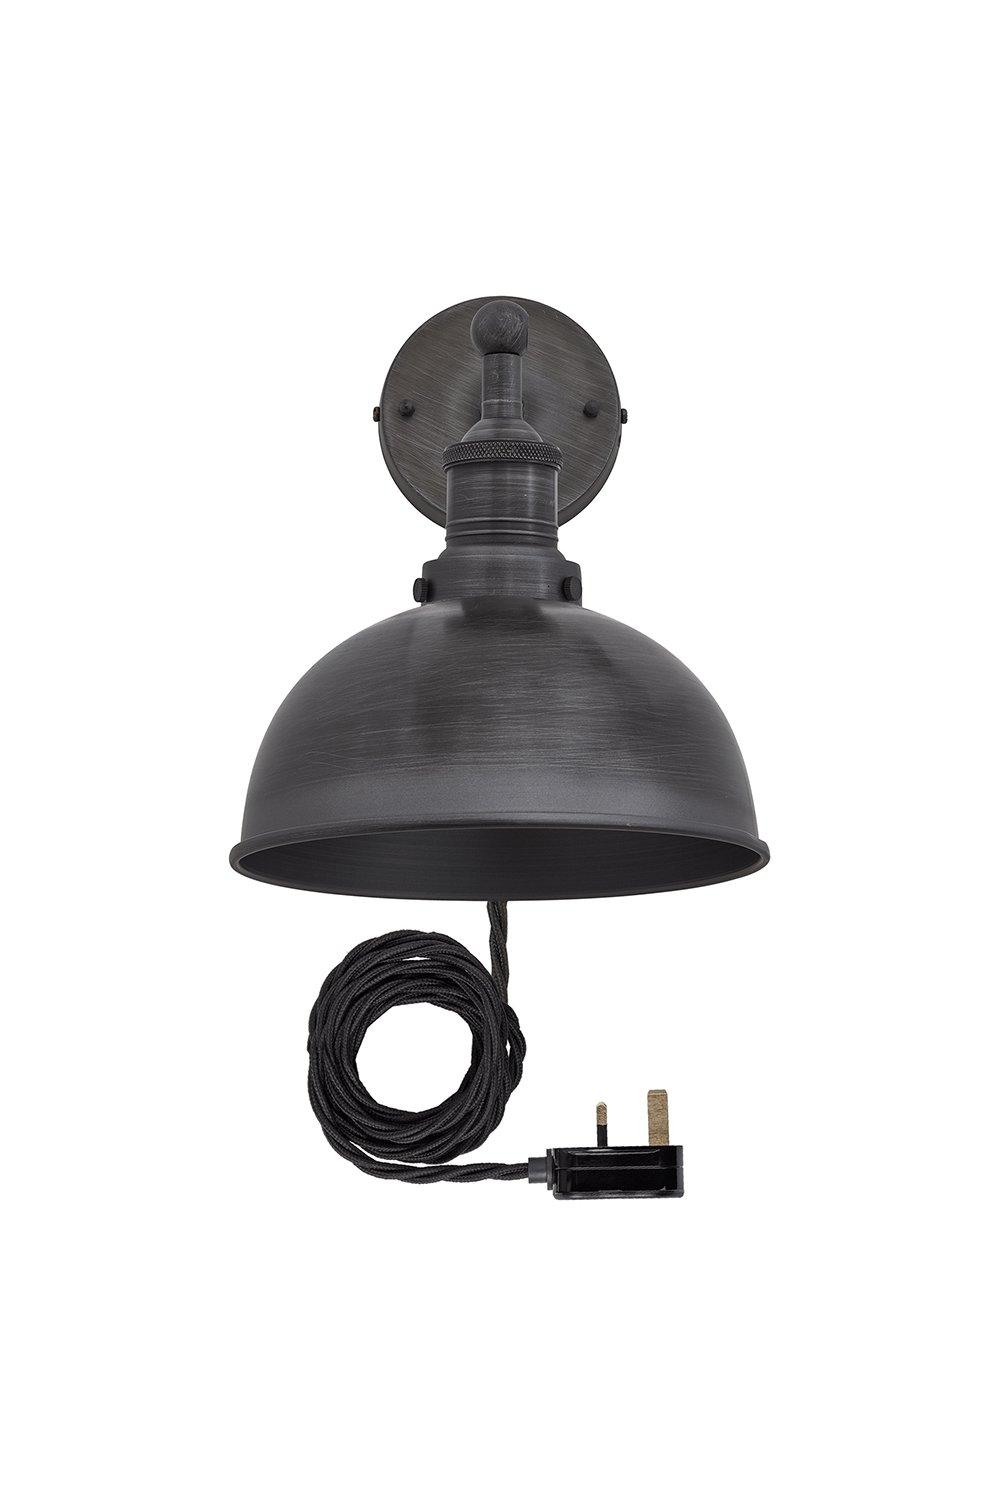 Brooklyn Dome Wall Light, 8 Inch, Pewter, Pewter Holder With Plug